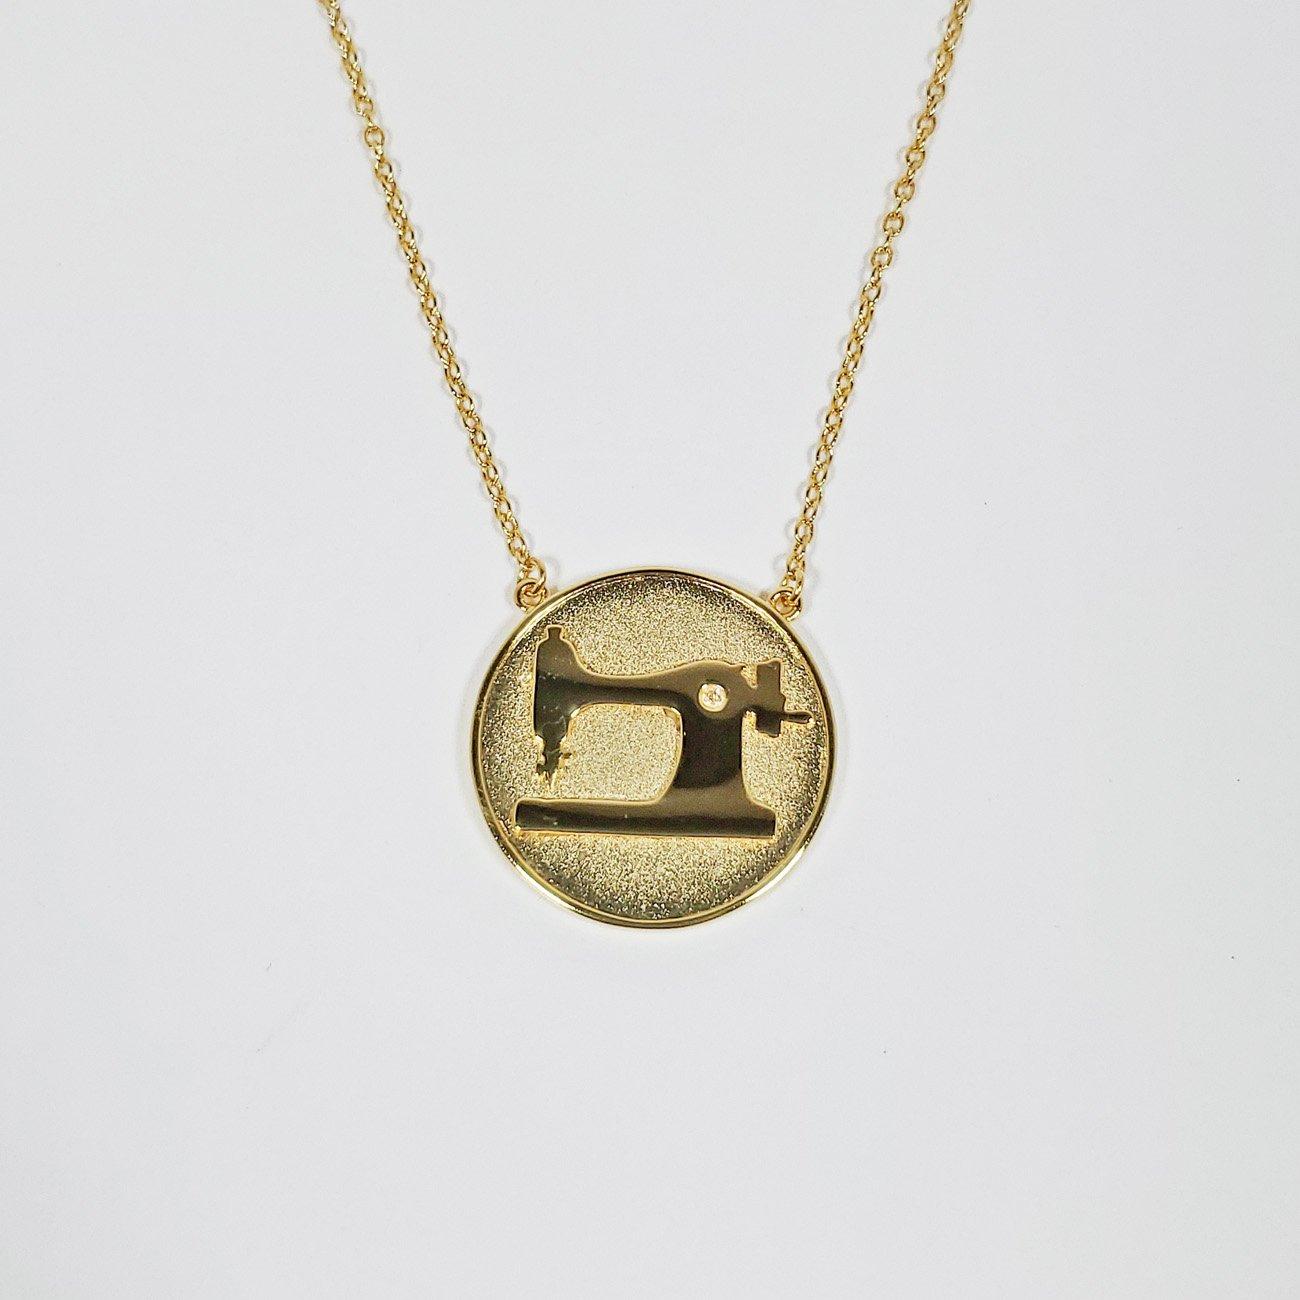 Sewing Machine Coin Necklace